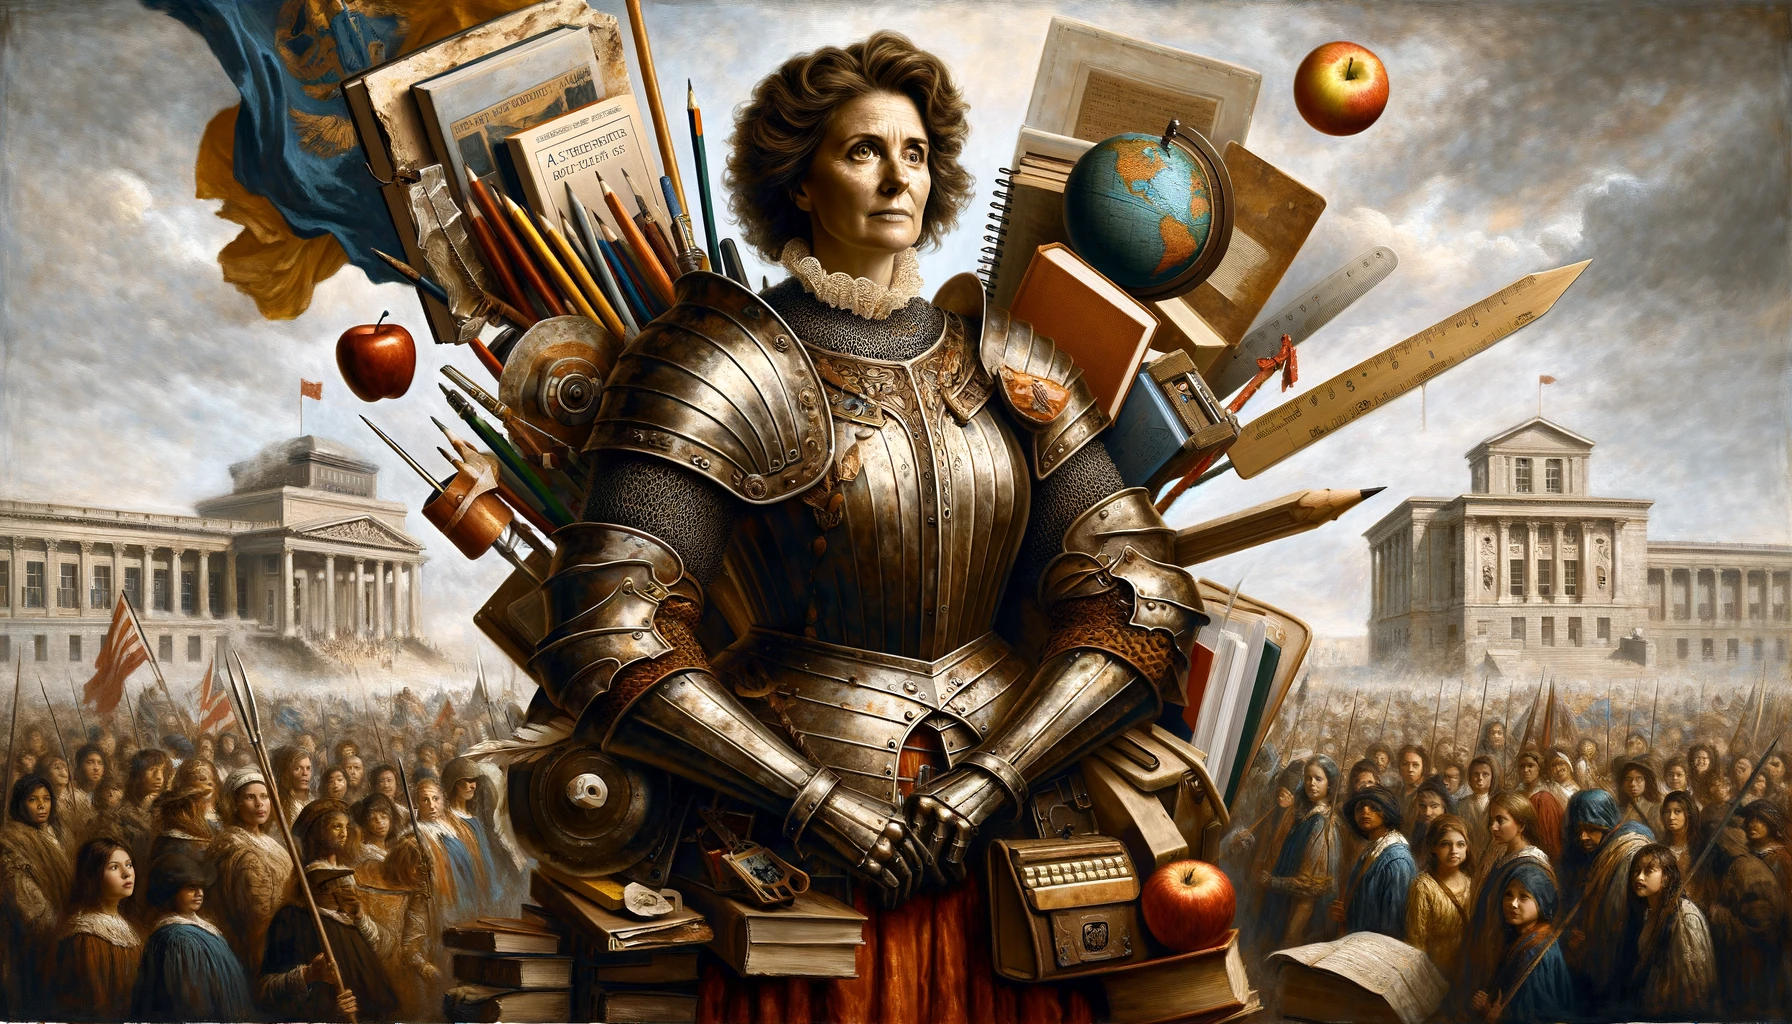 A teacher dressed as a warrior in a classical painting setting but surrounded by school gear.